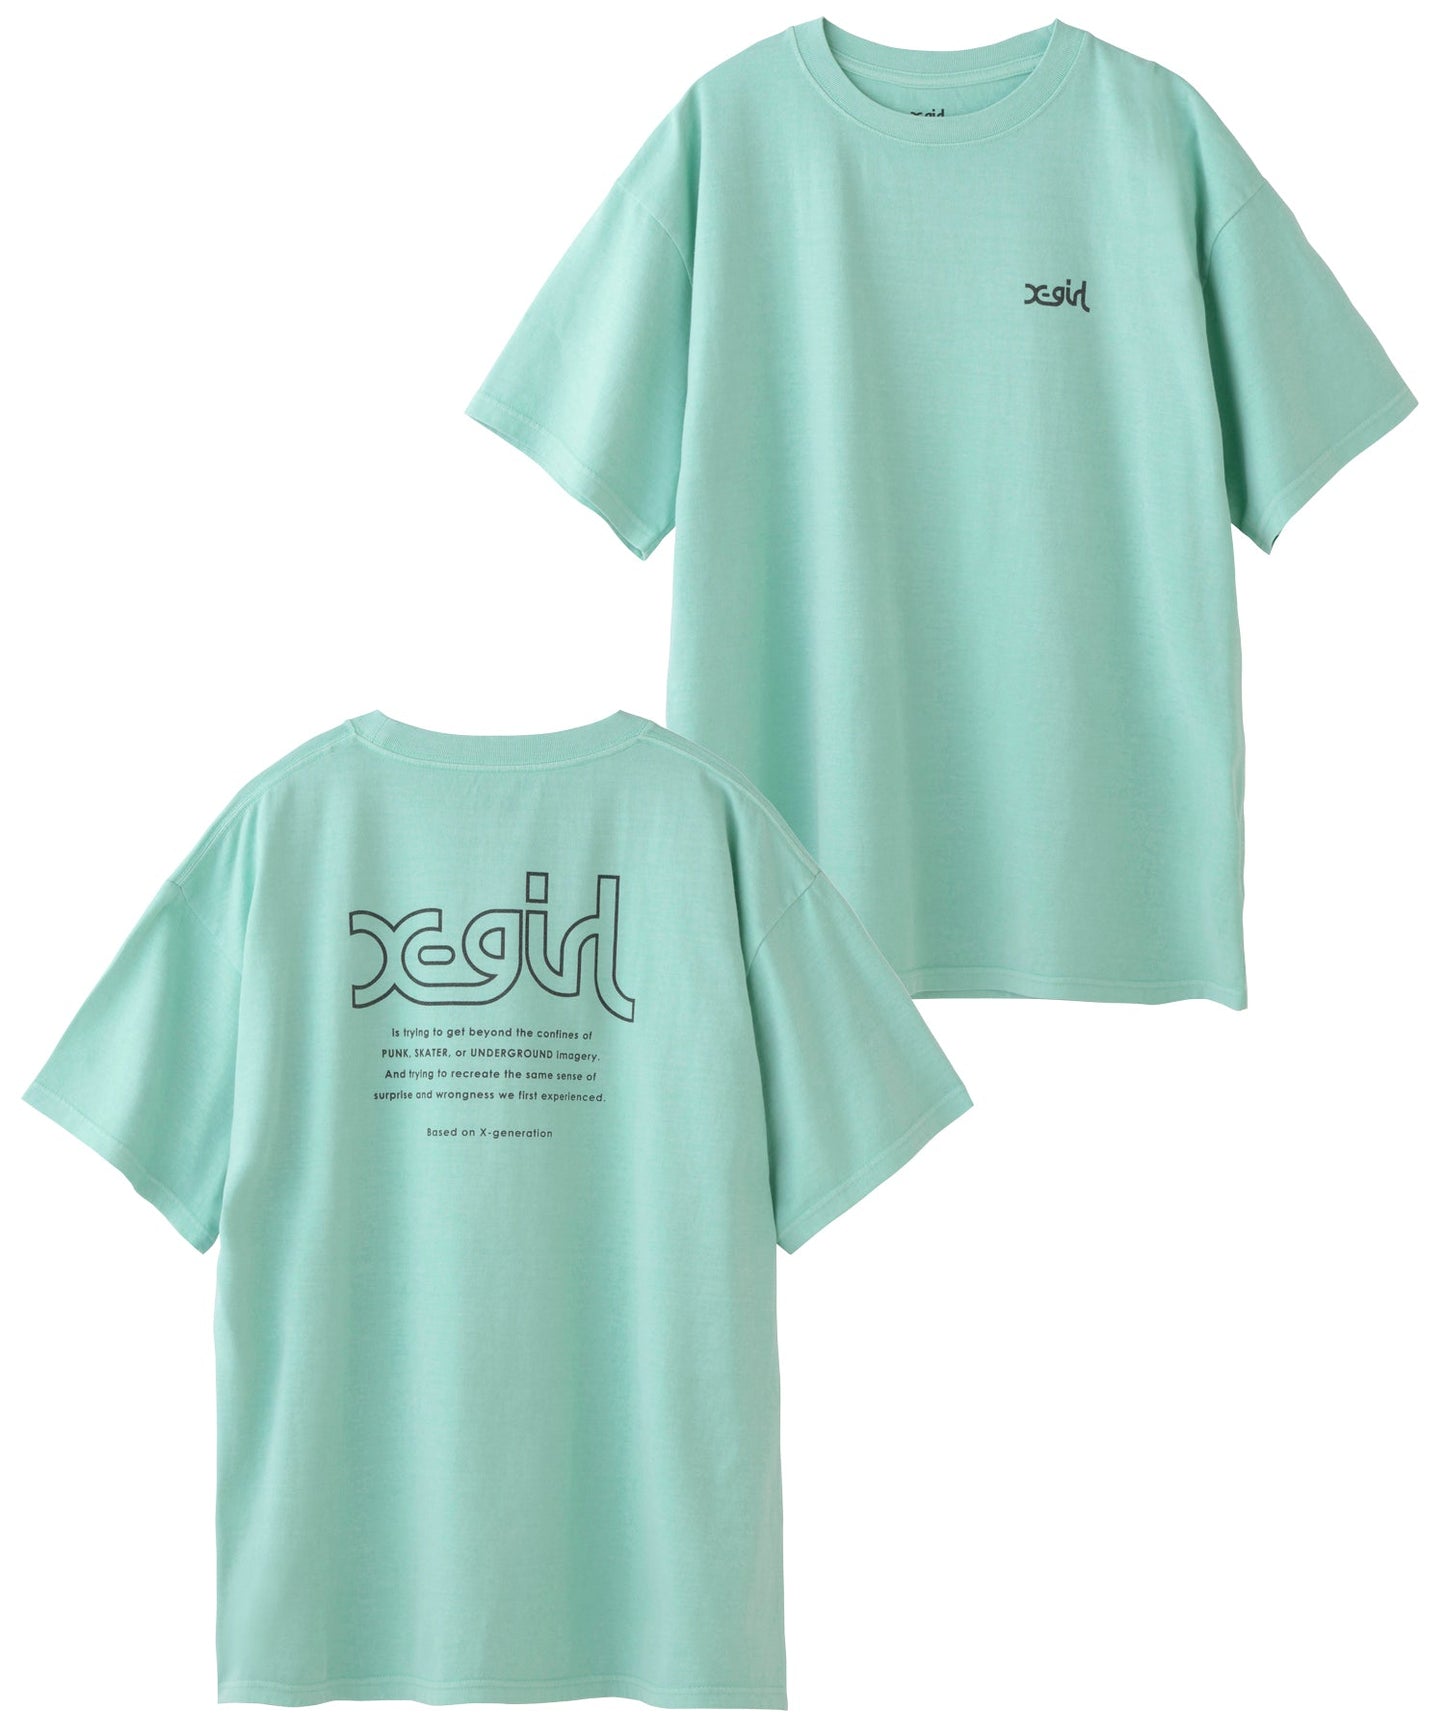 WORDS LOGO PIGMENT DYED S/S MENS TEE